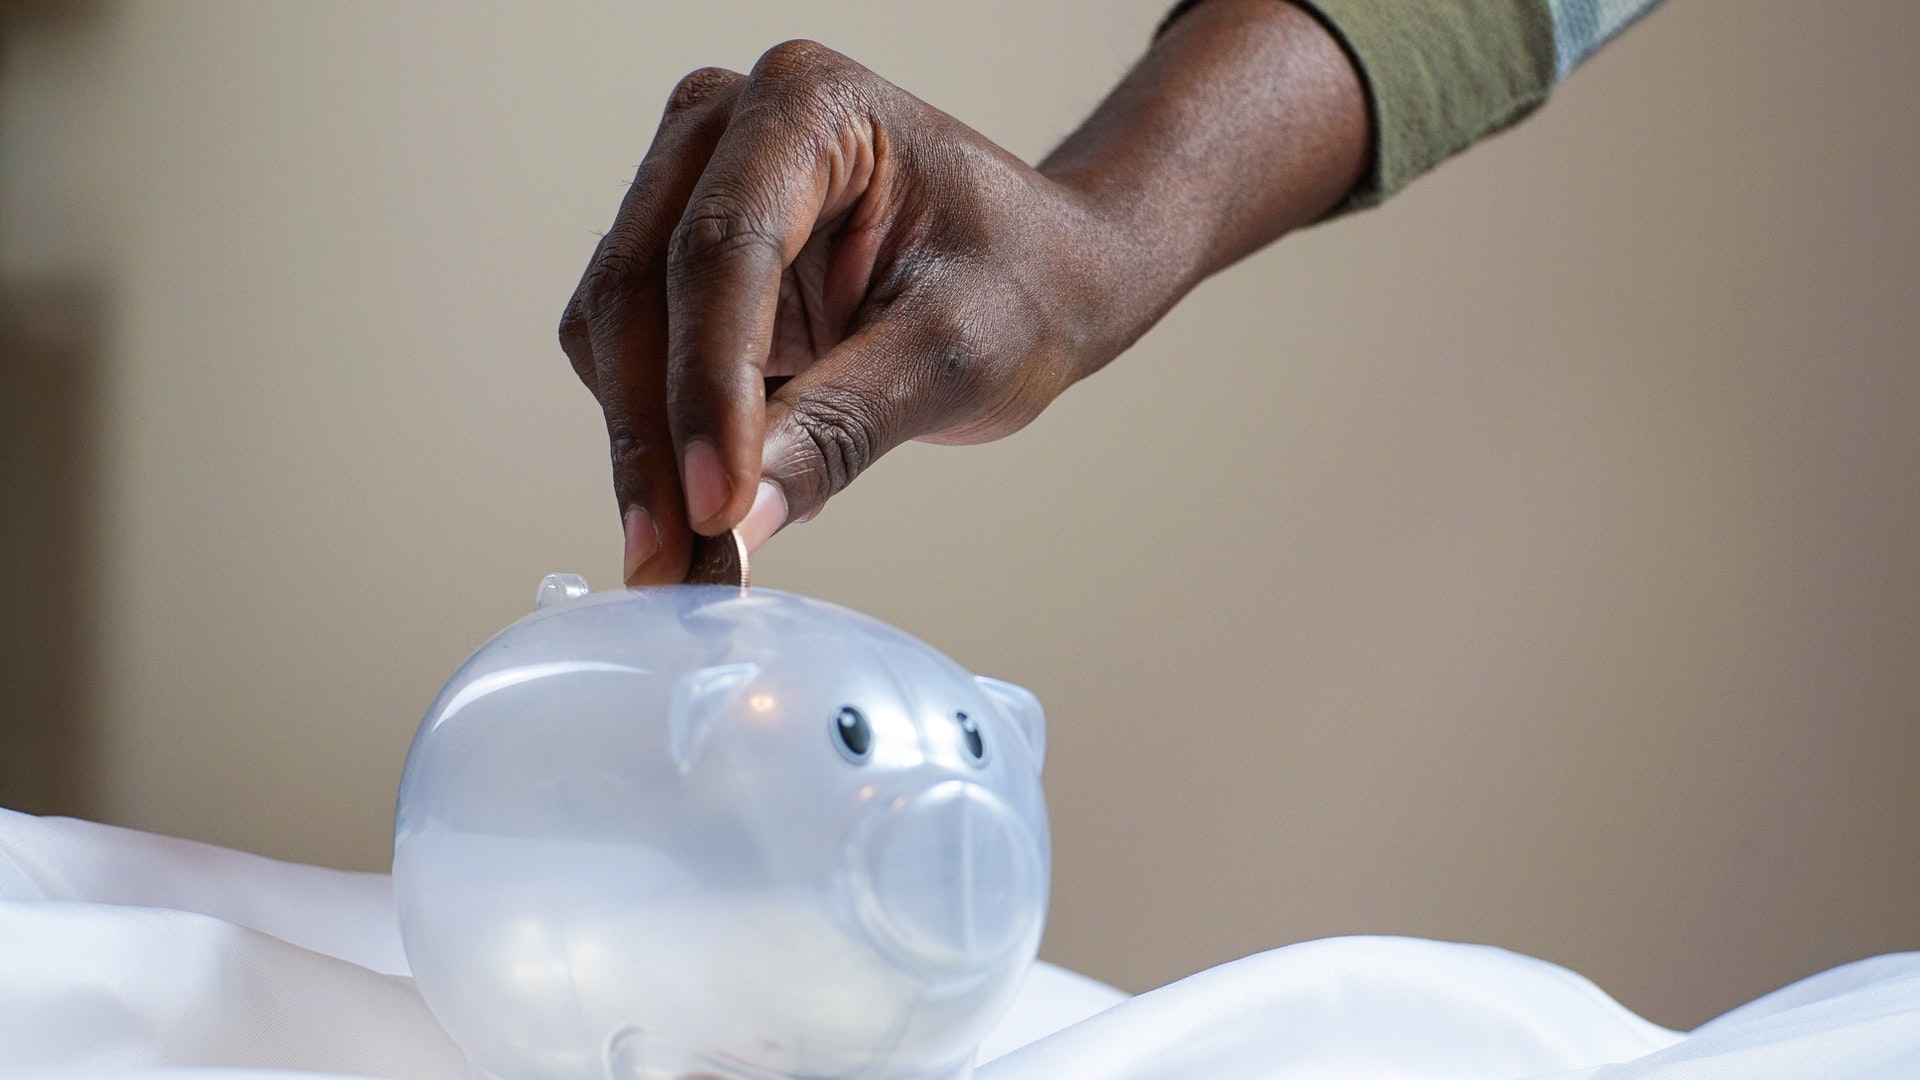 Saving money by putting coins into a piggy bank